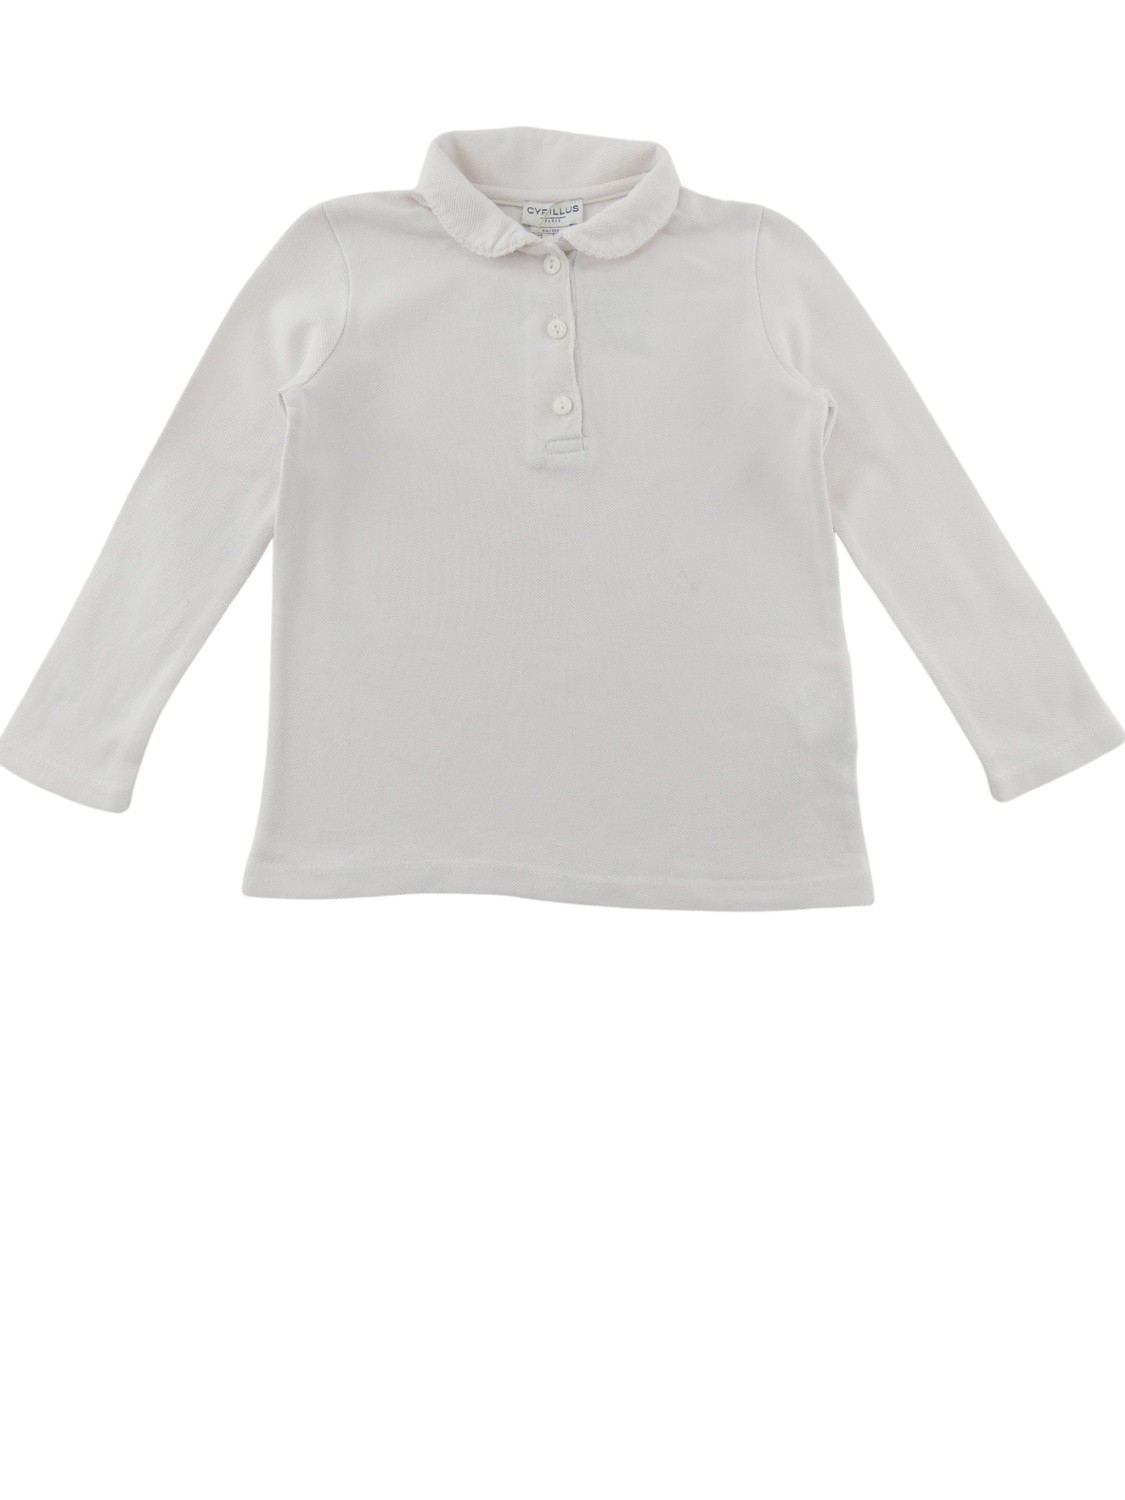 T-shirt polo ML 3 boutons  CYRILLUS taille 4 ans